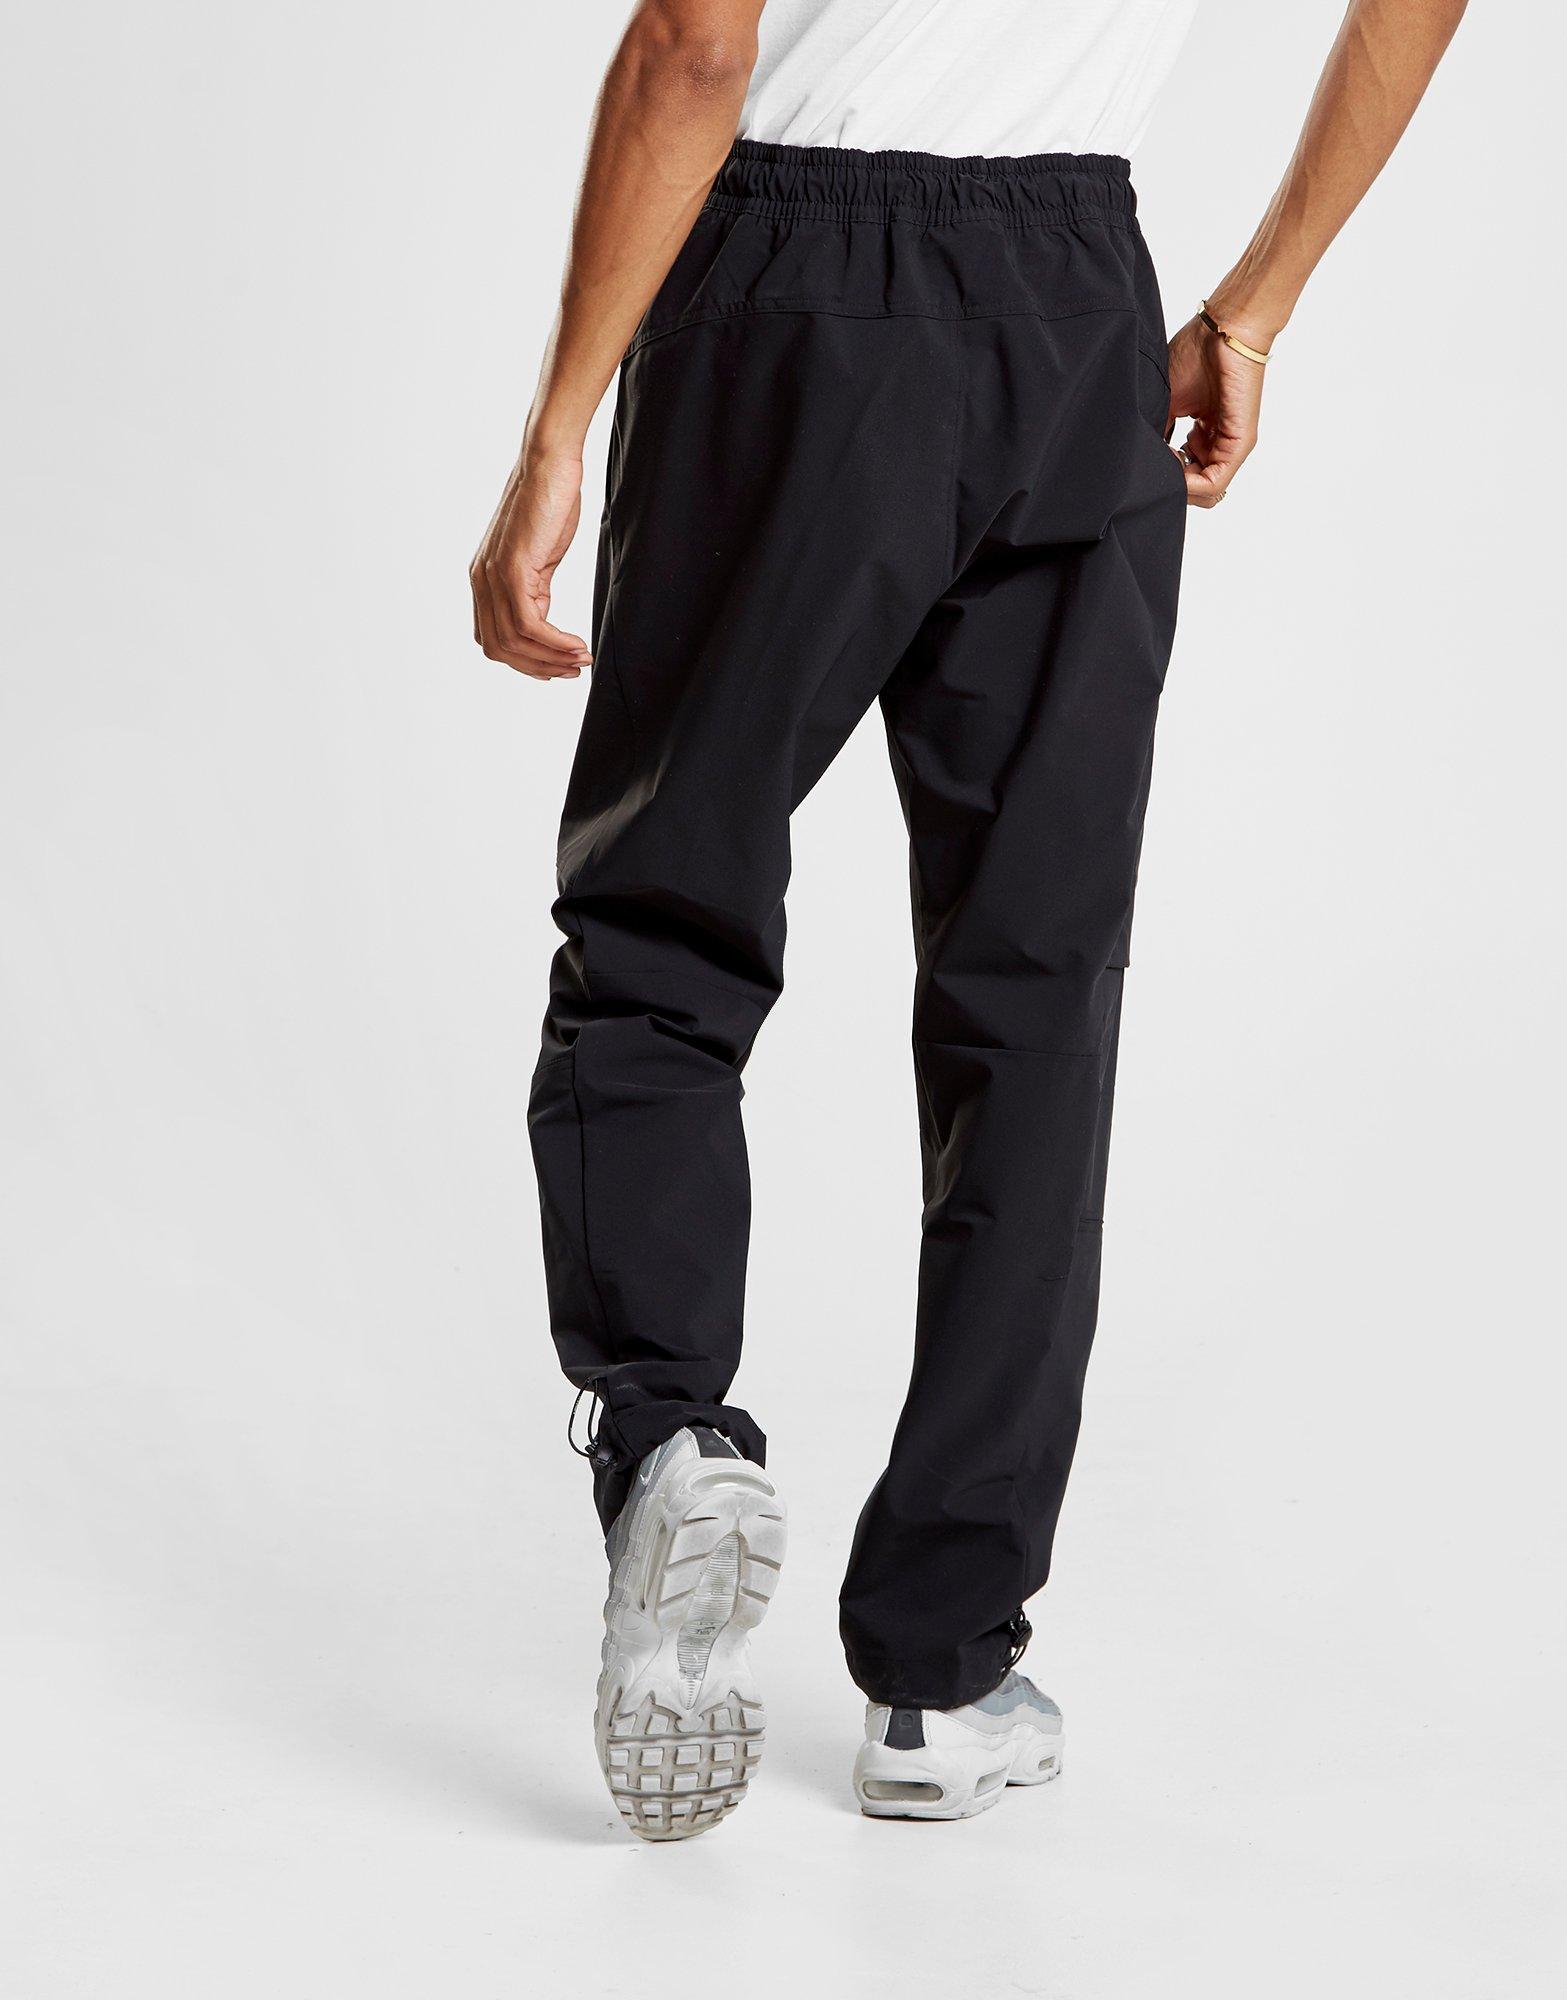 Nike Synthetic Air Max Woven Track Pants in Black for Men - Lyst